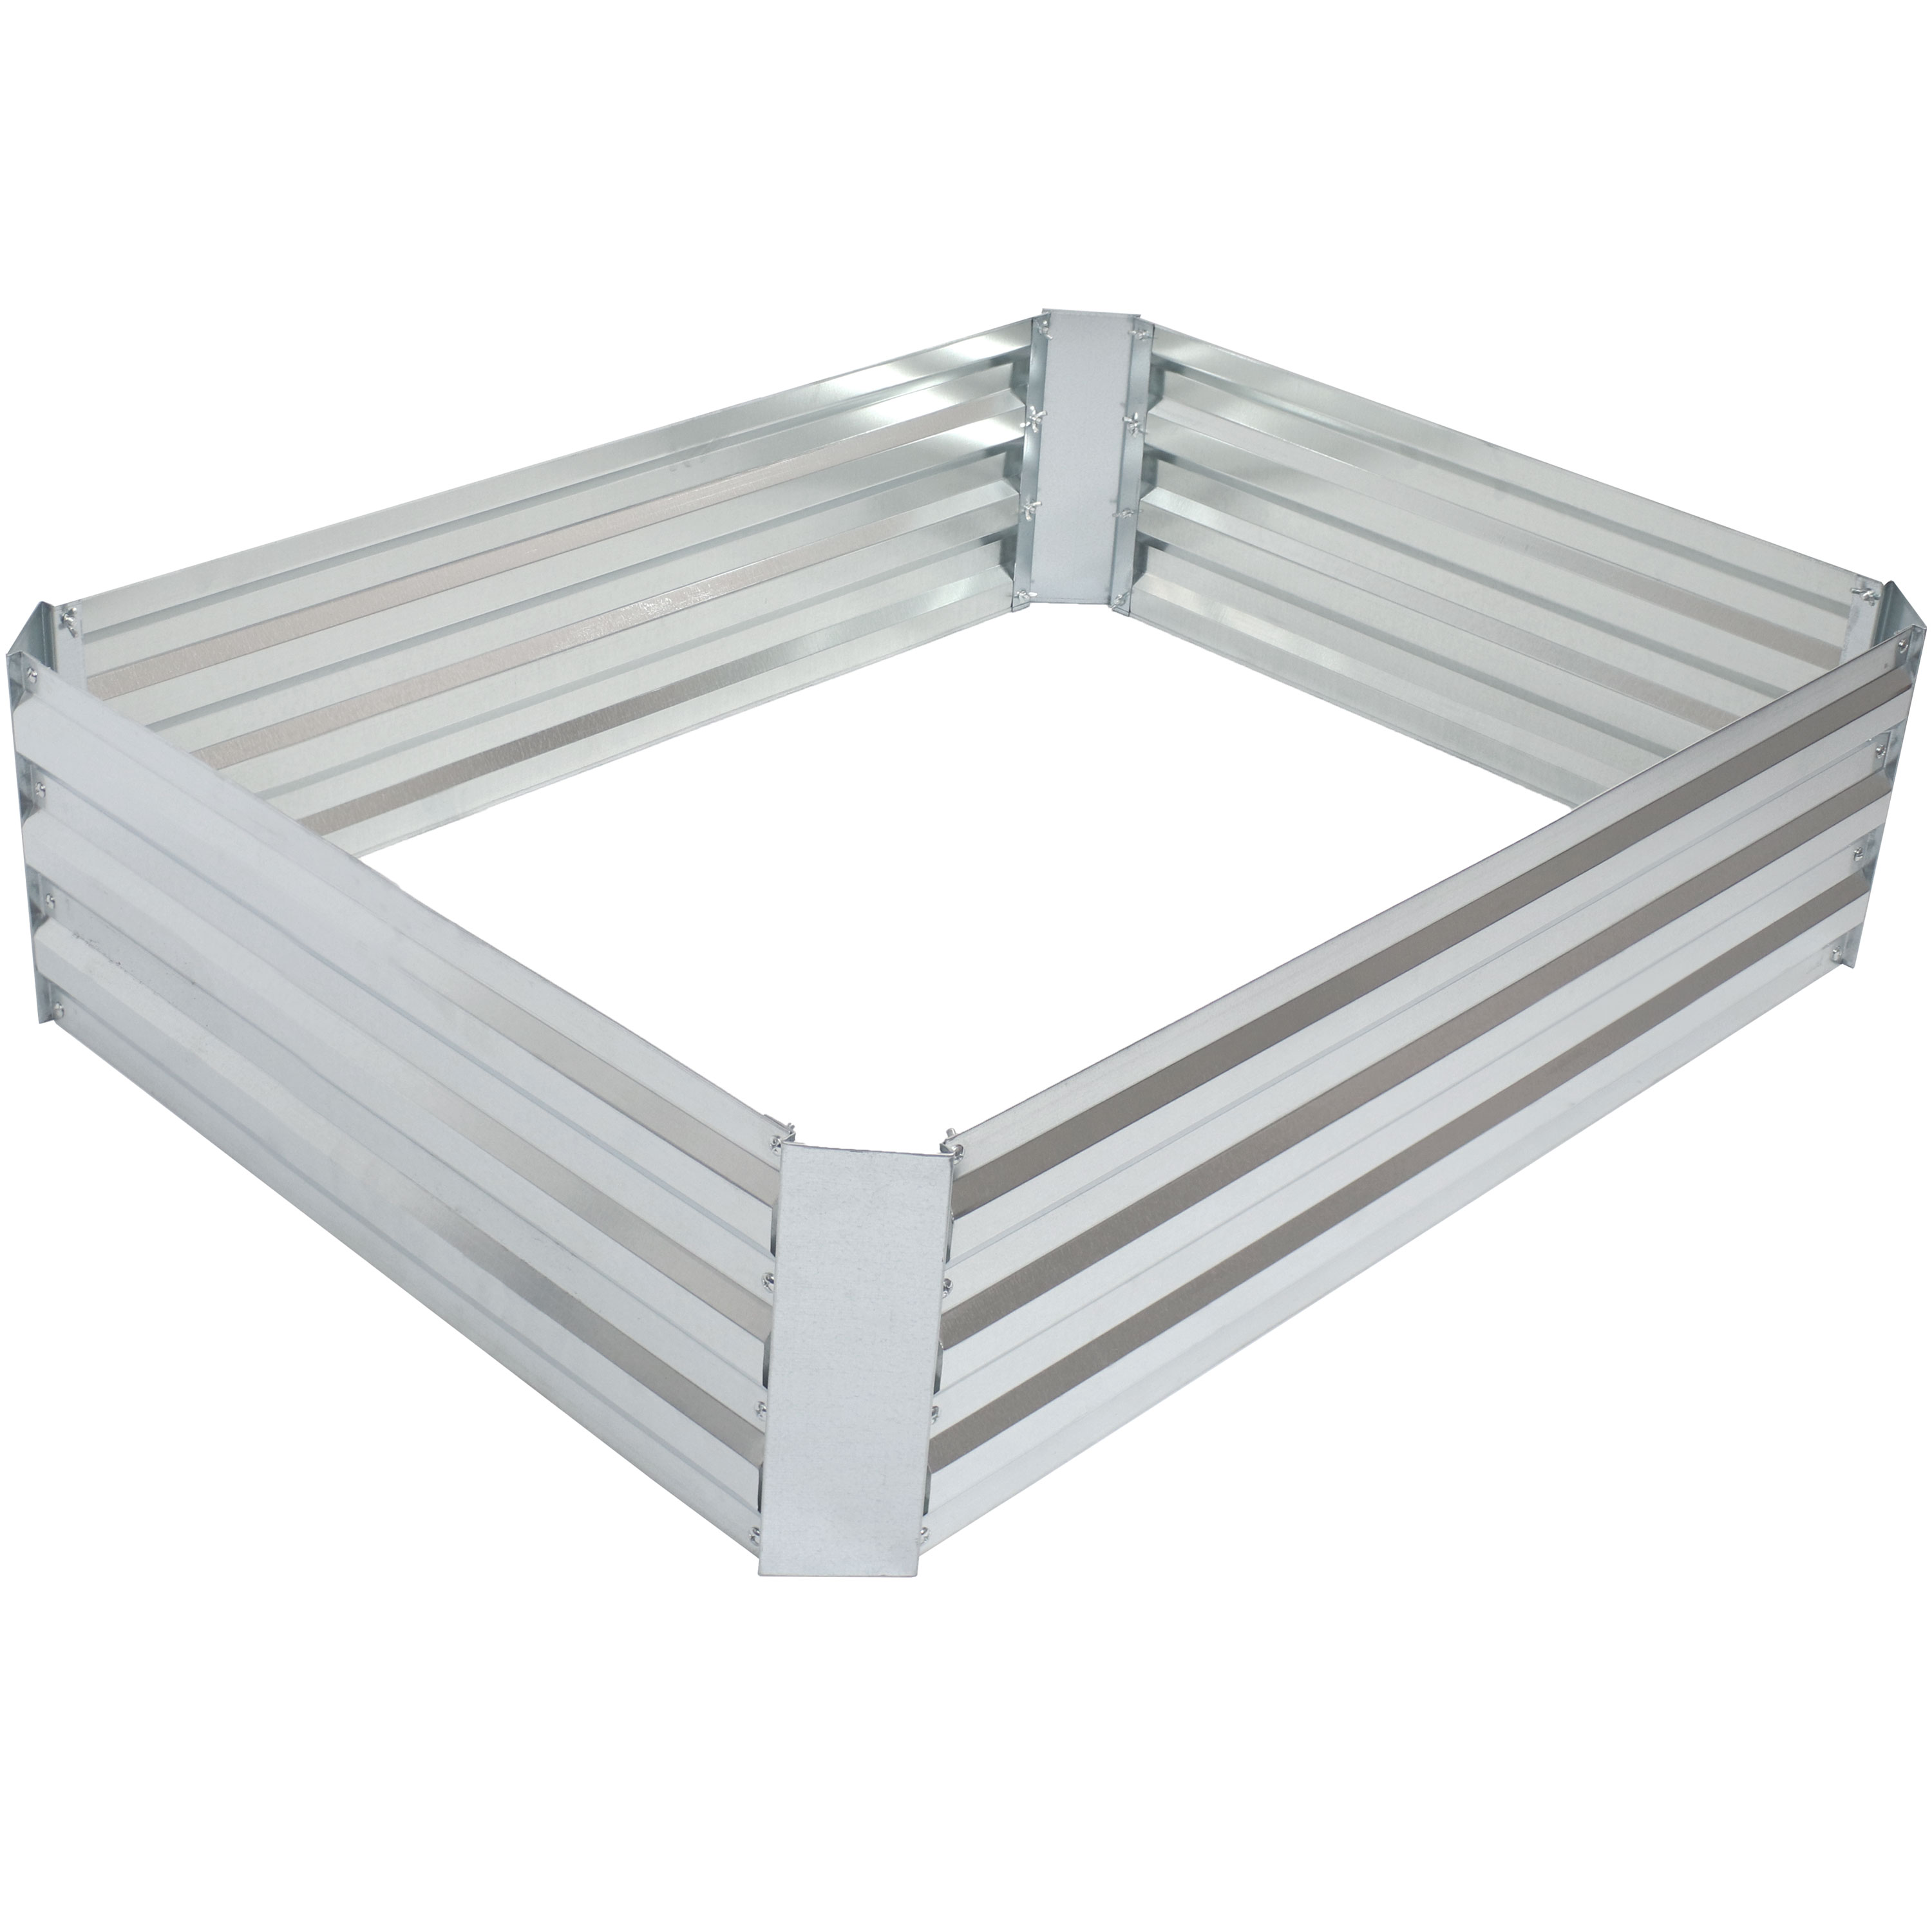 Rectangle Steel Raised Planter Bed - 4 x 3 ft - Silver